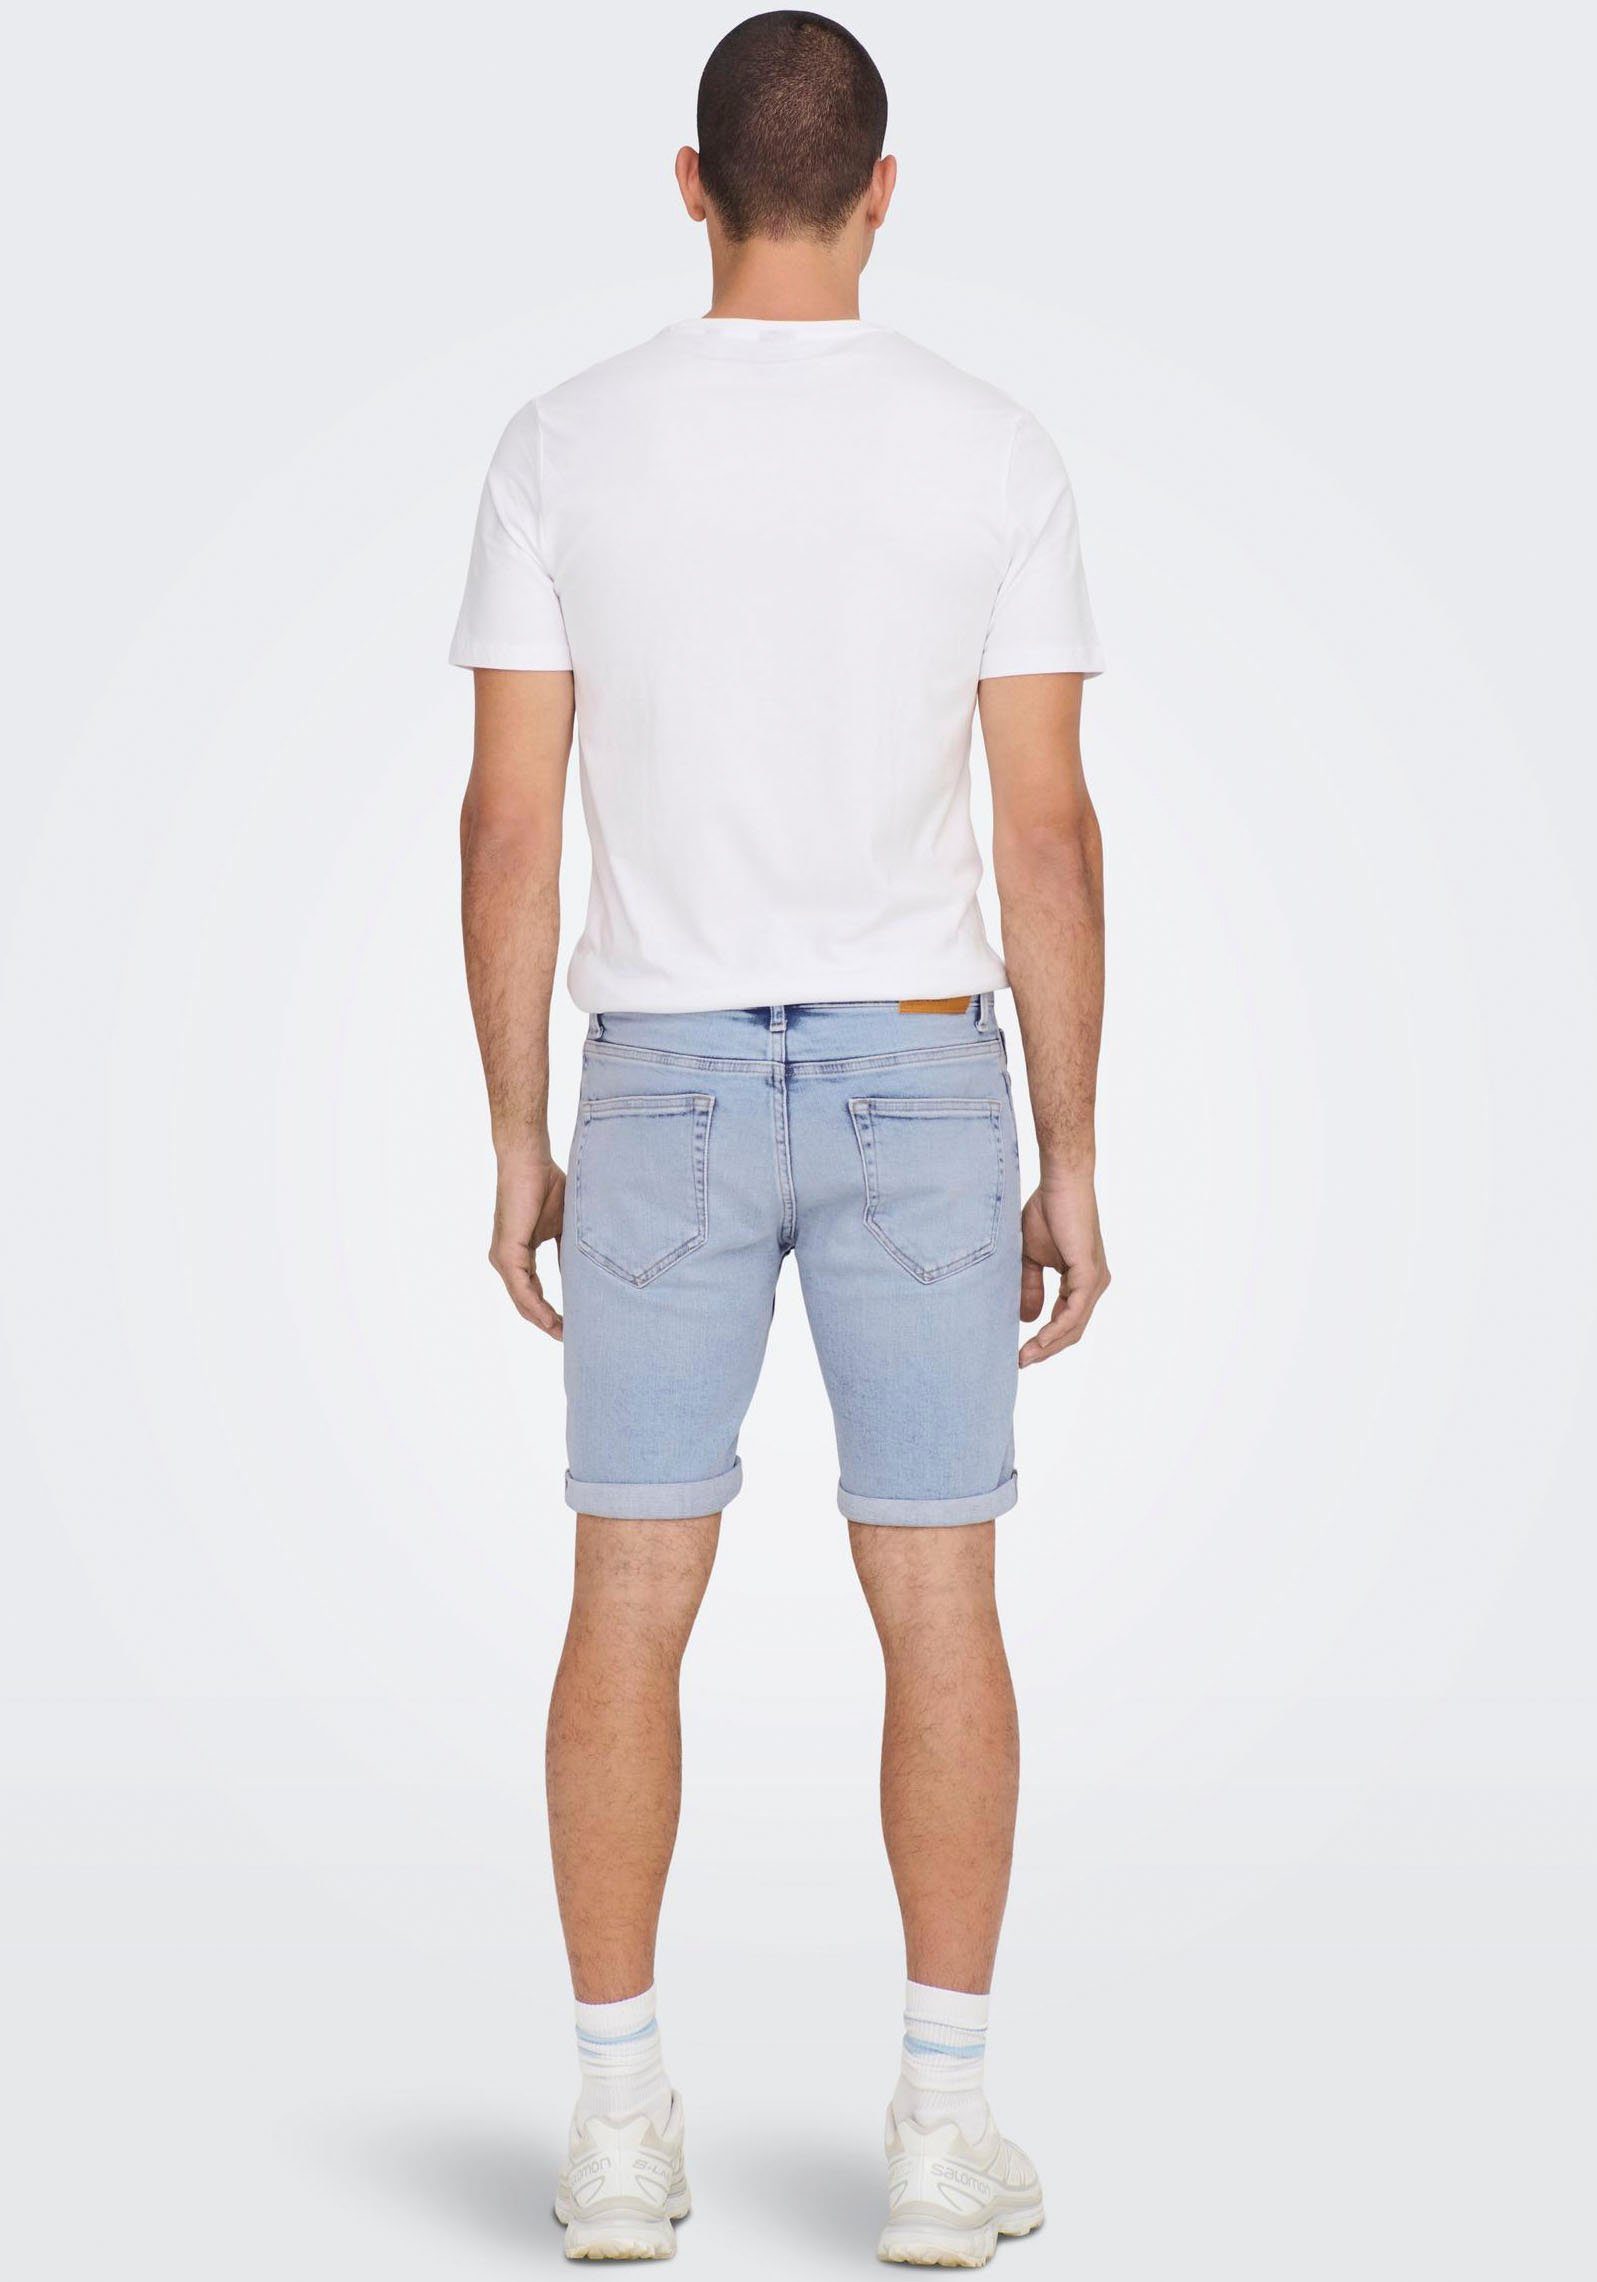 Blue BLUE LIGHT SHORTS SONS ONLY 5189 NOOS ONSPLY Denim DNM & Light Jeansshorts